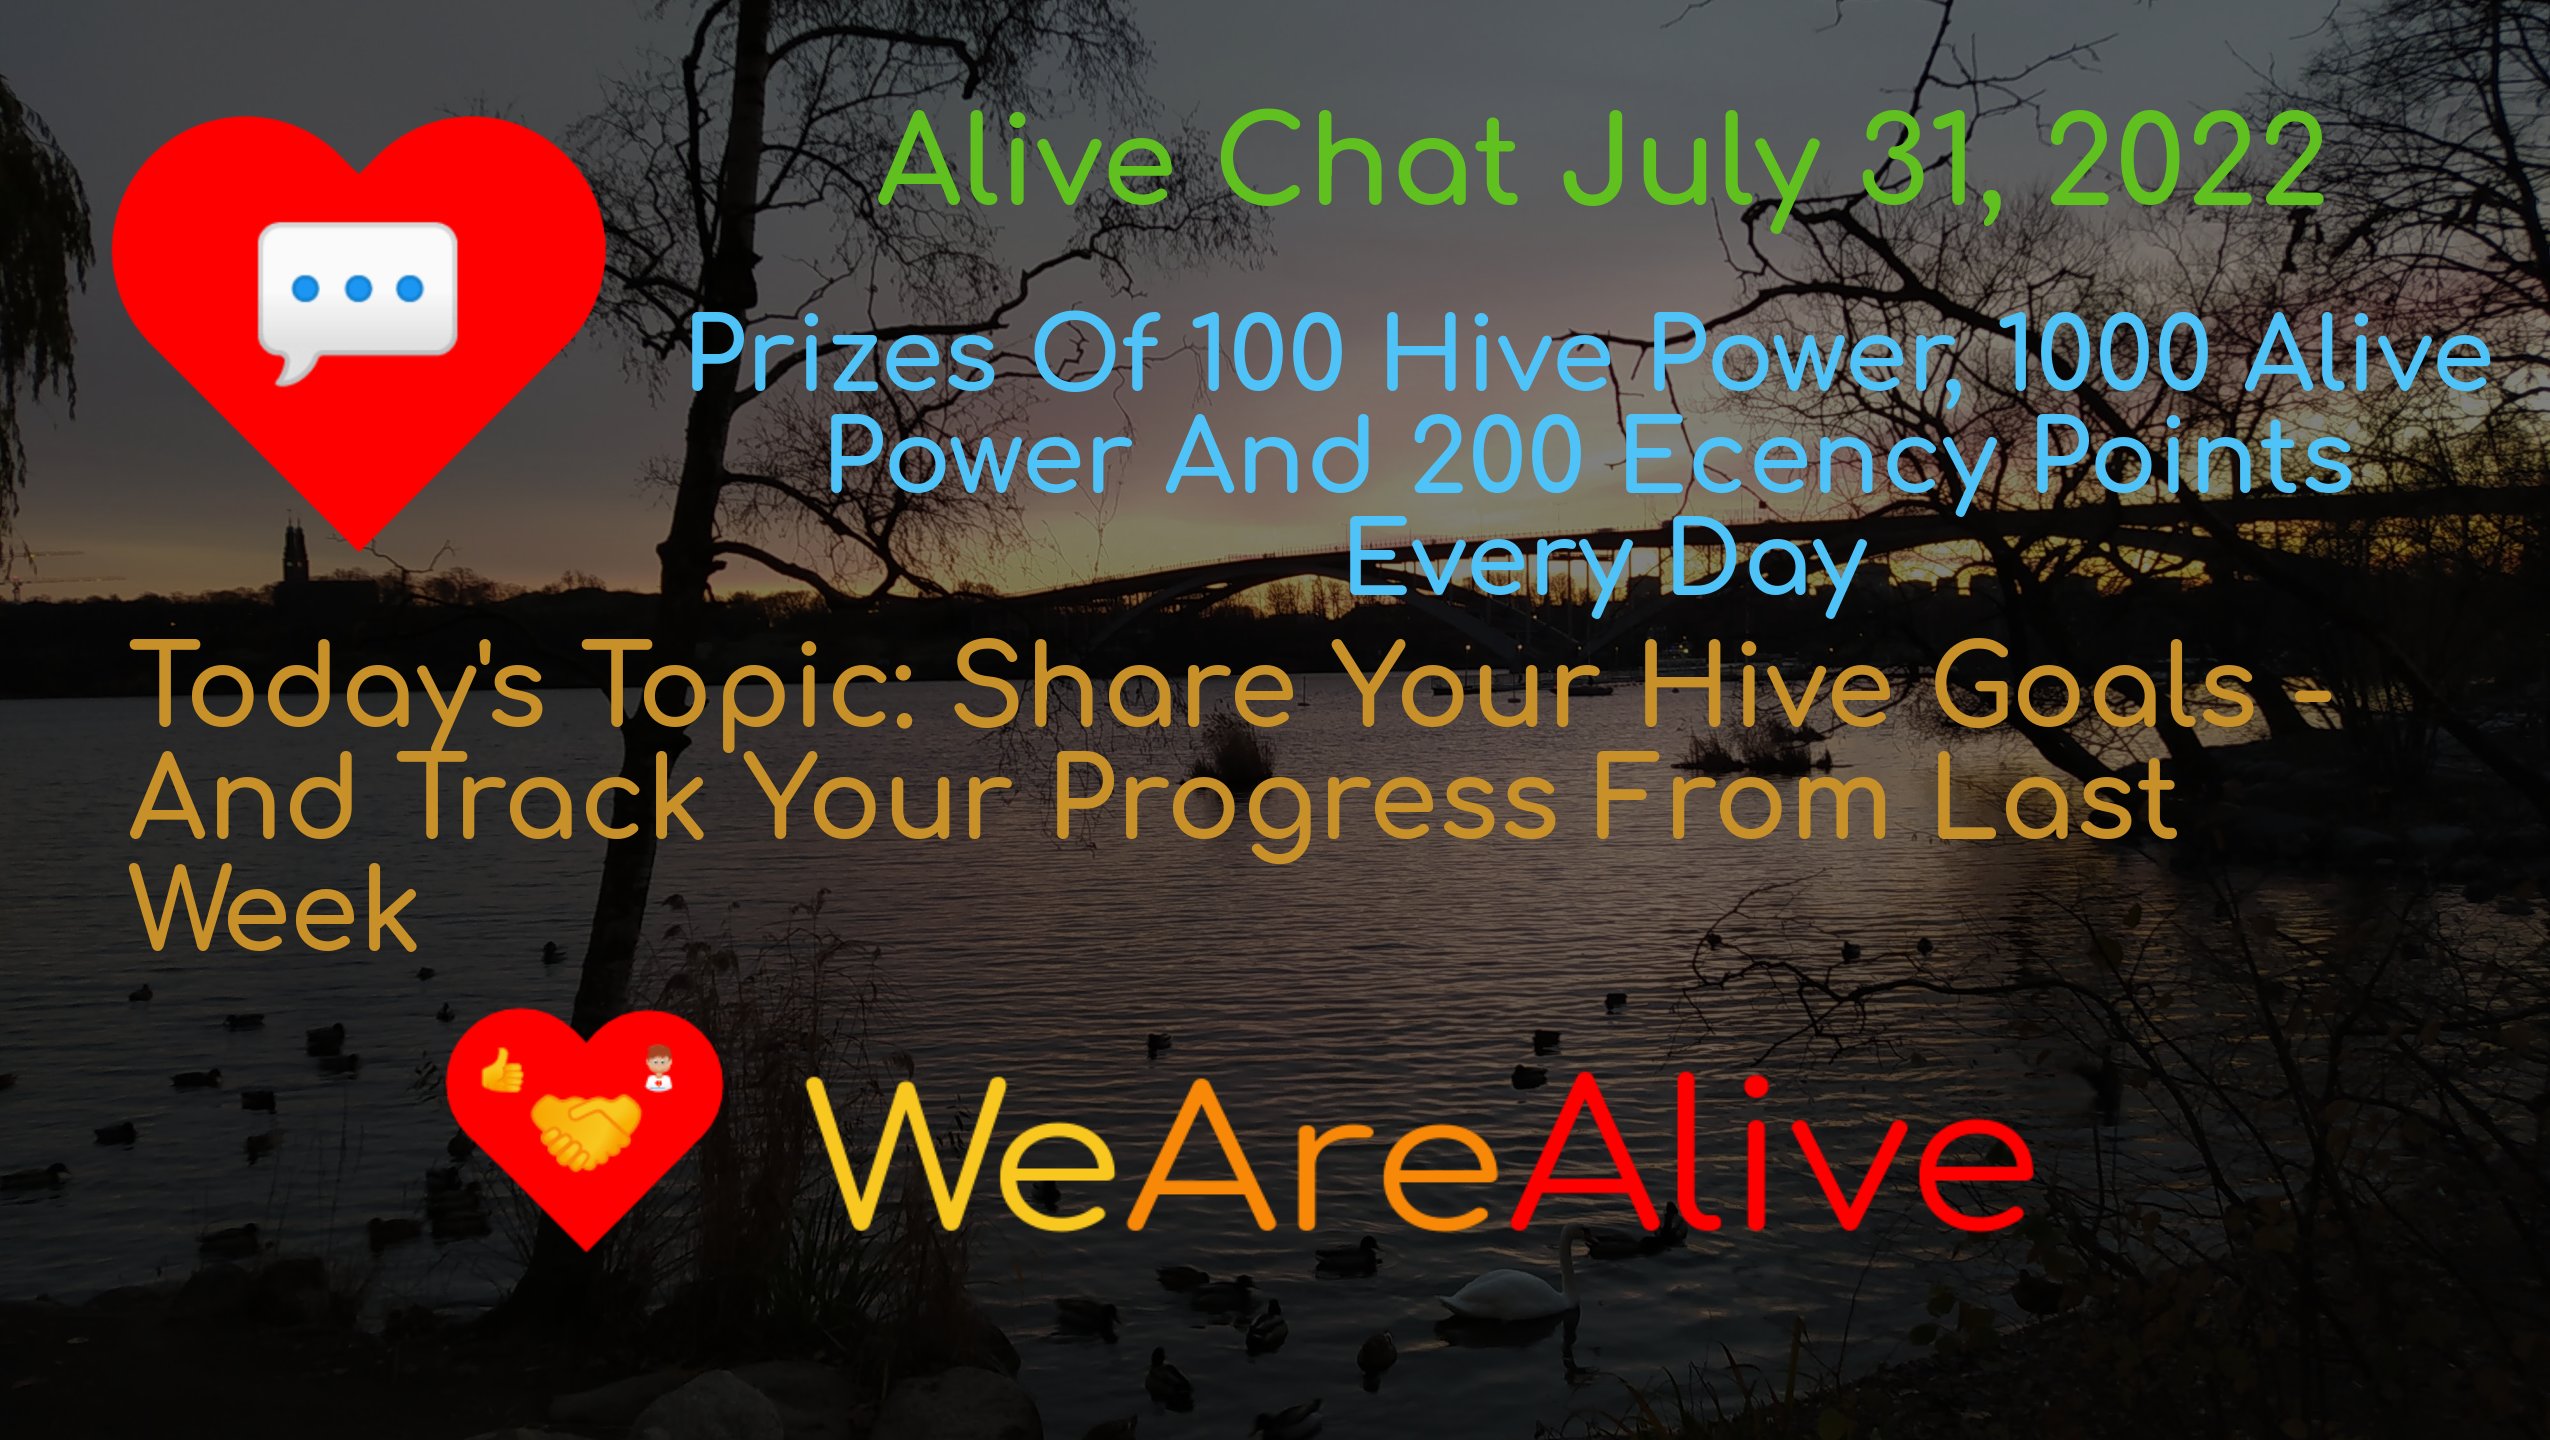 @alive.chat/alive-chat-july-31-2022-daily-prize-drawing-open-for-entries-todays-topic-share-your-hive-goals-and-track-your-progress-from-l